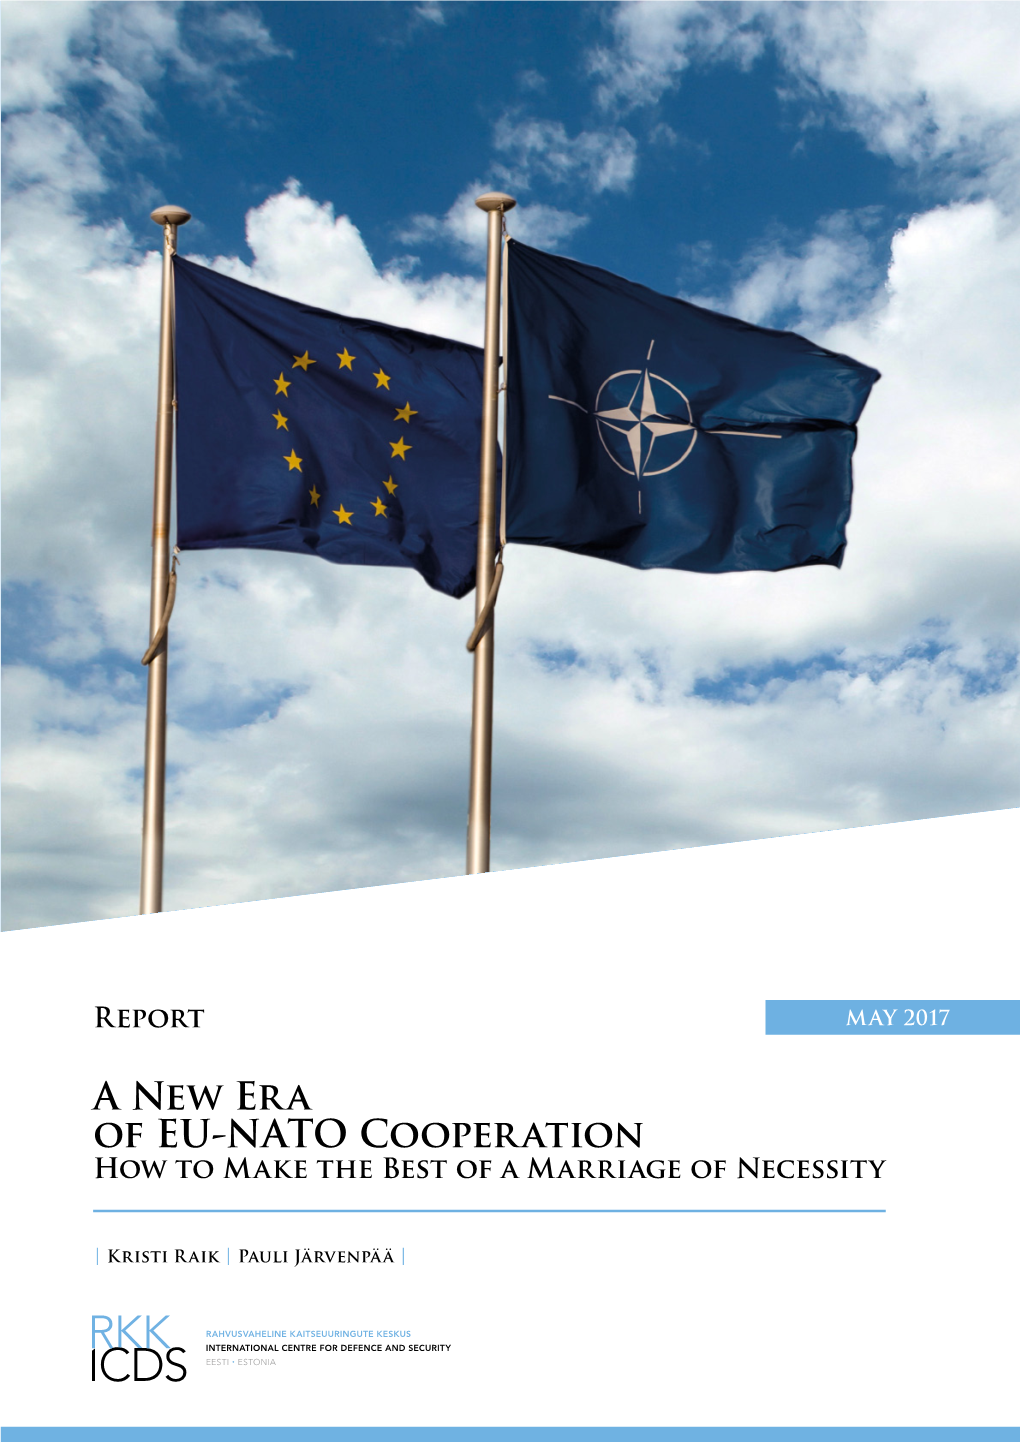 A New Era of EU-NATO Cooperation: How to Make the Best of a Marriage of Necessity Authors: Raik, Kristi; Järvenpää, Pauli Publication Date: May 2017 Category: Report